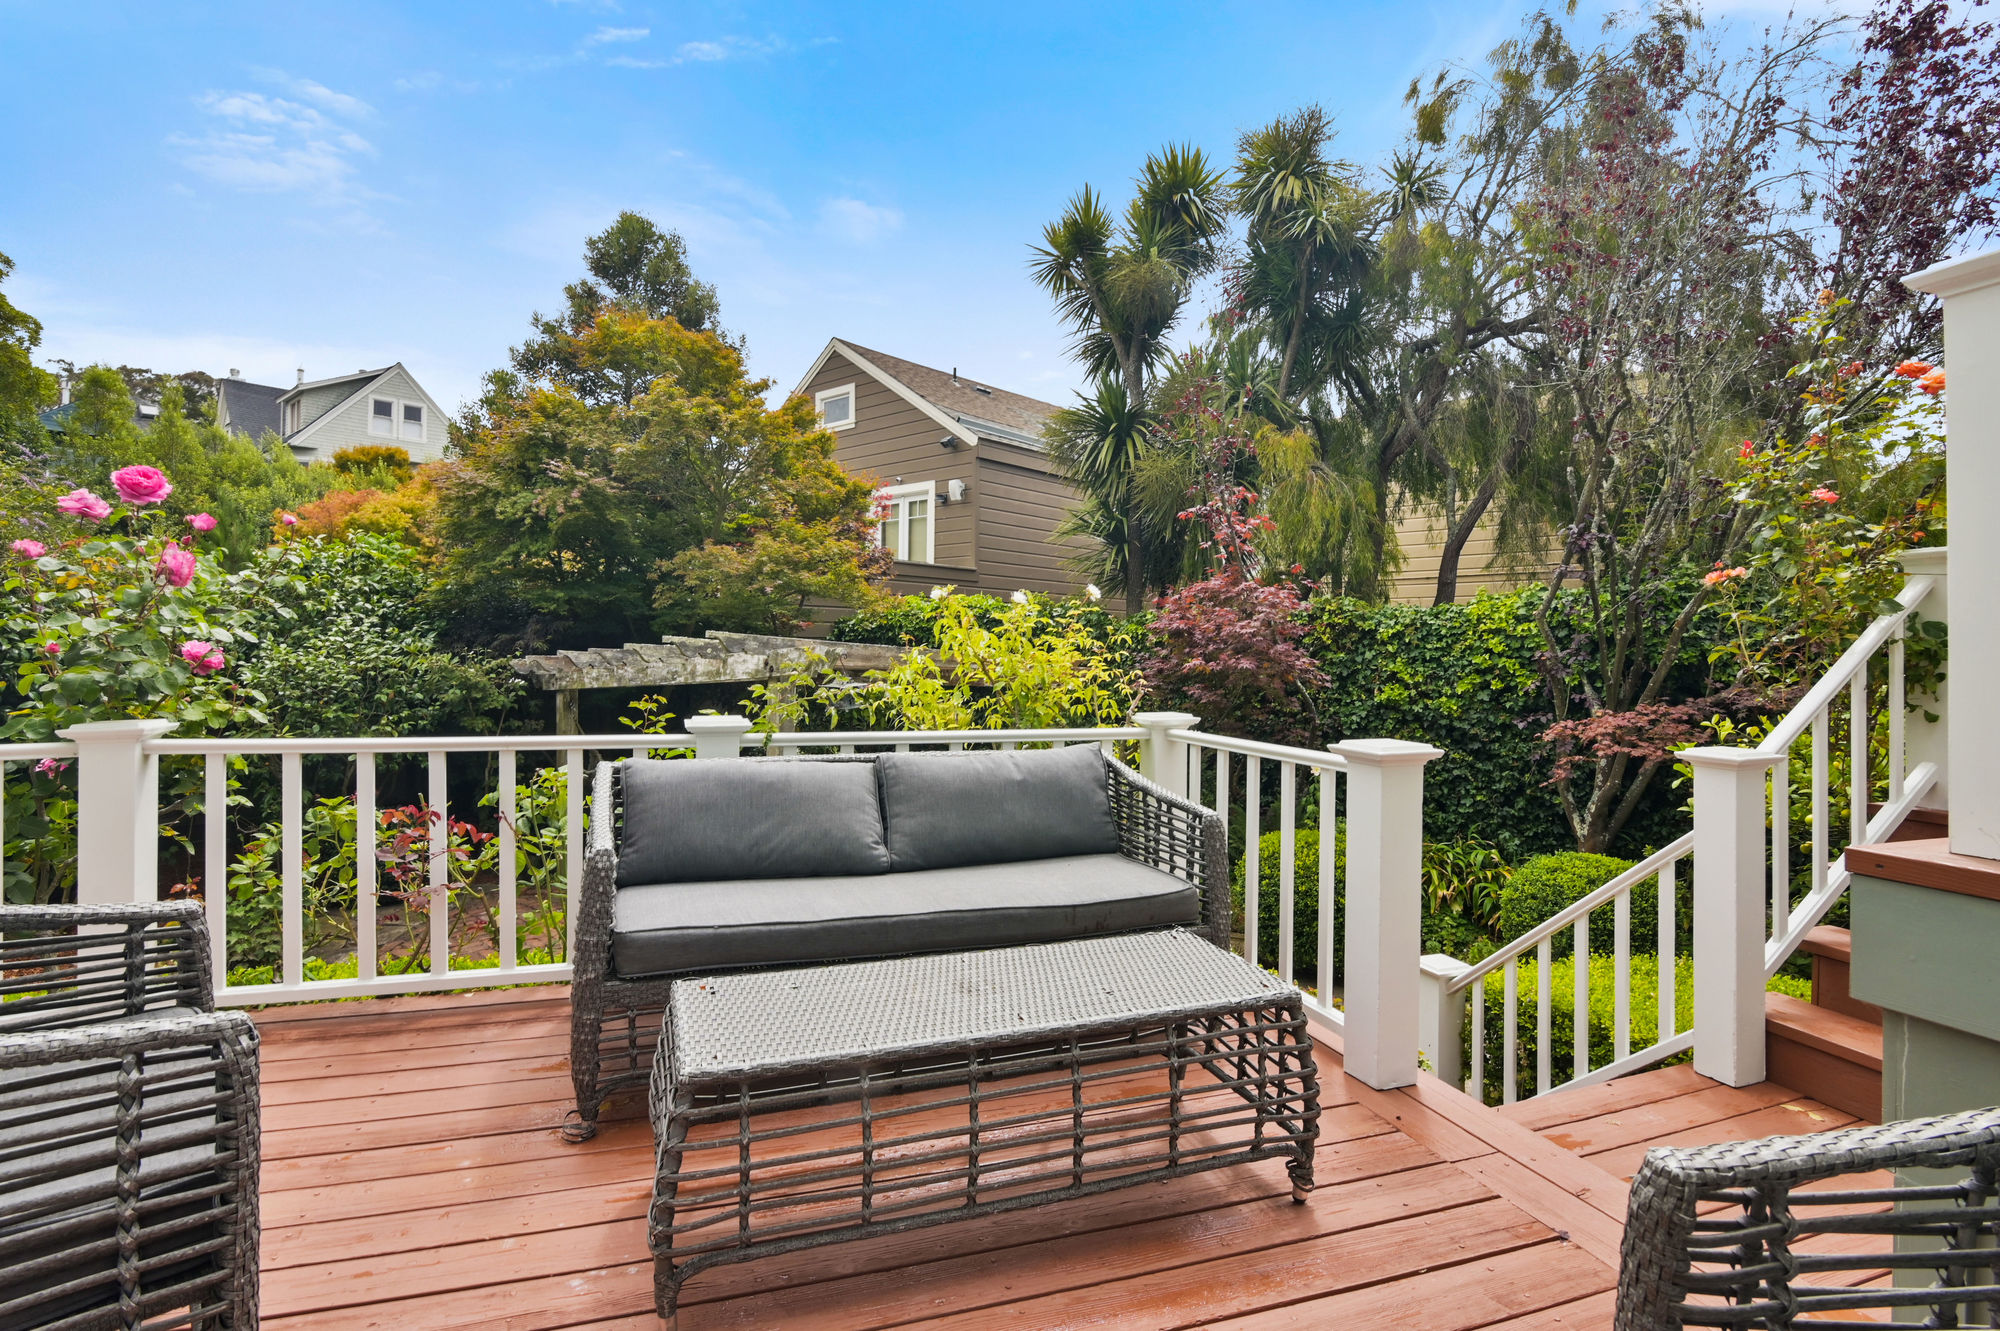 Property Photo: Deck with outdoor living area